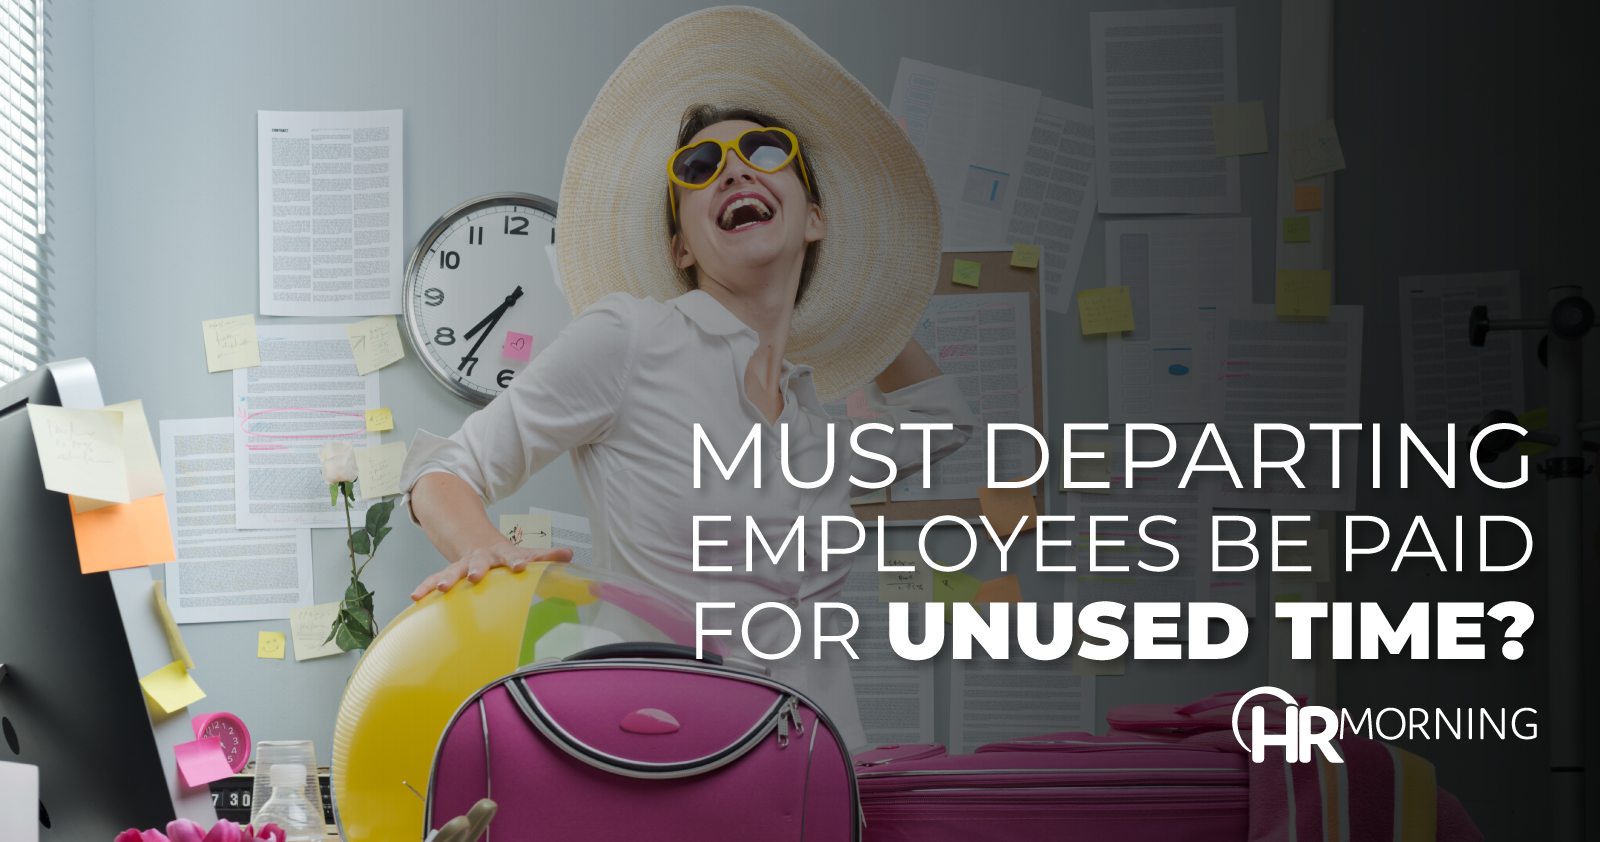 must departing employee be paid for unused time